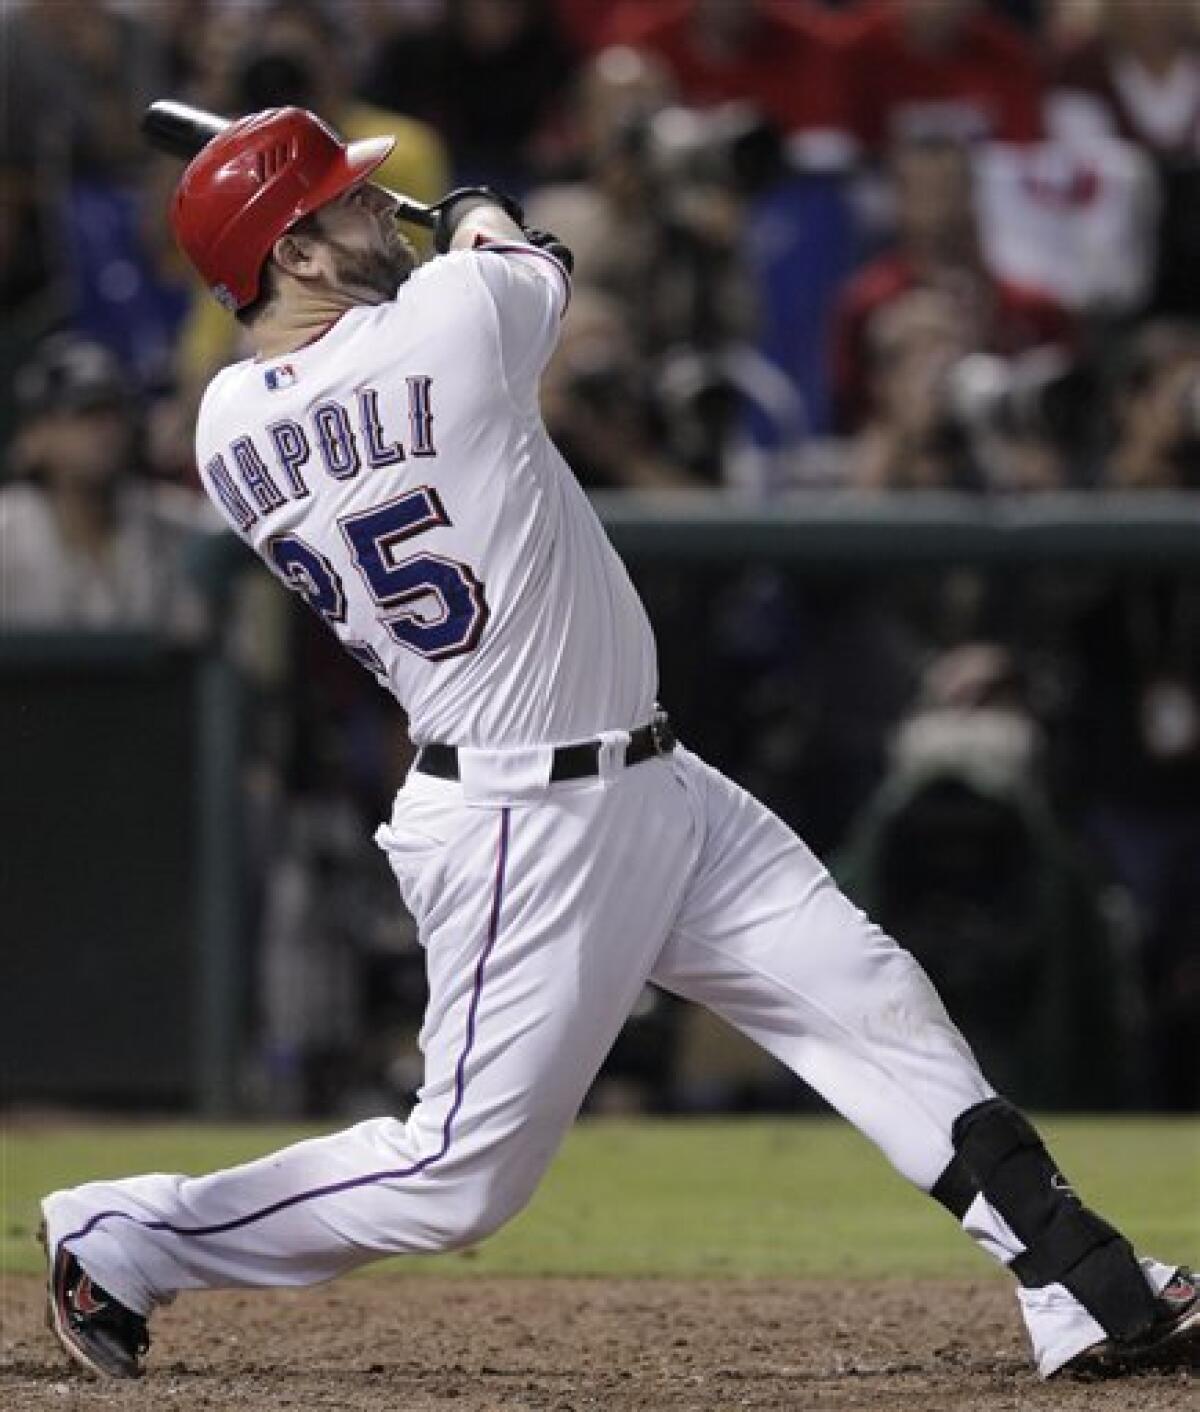 The Texas Rangers Re-Sign Mike Napoli